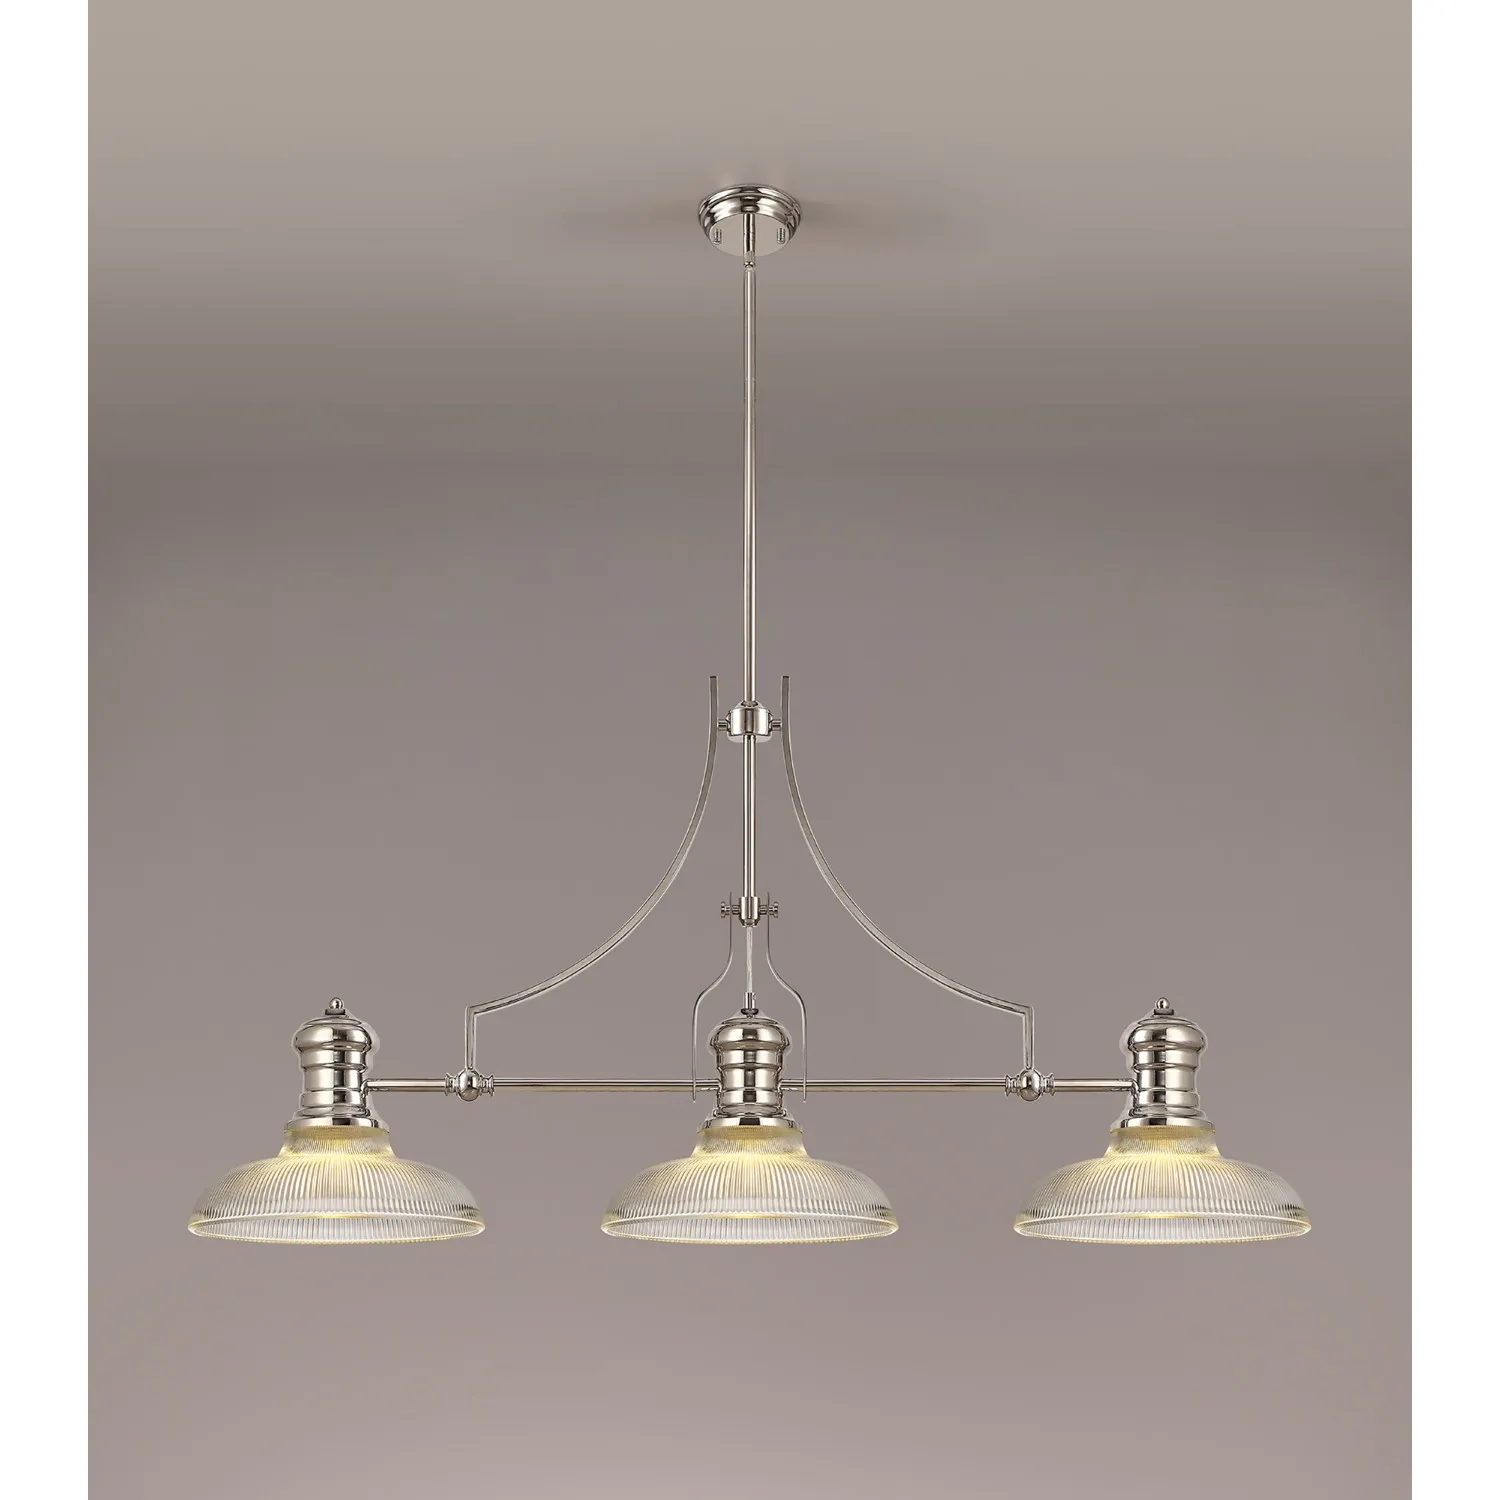 Sandy 3 Light Linear Pendant E27 With 30cm Round Glass Shade, Polished Nickel, Clear